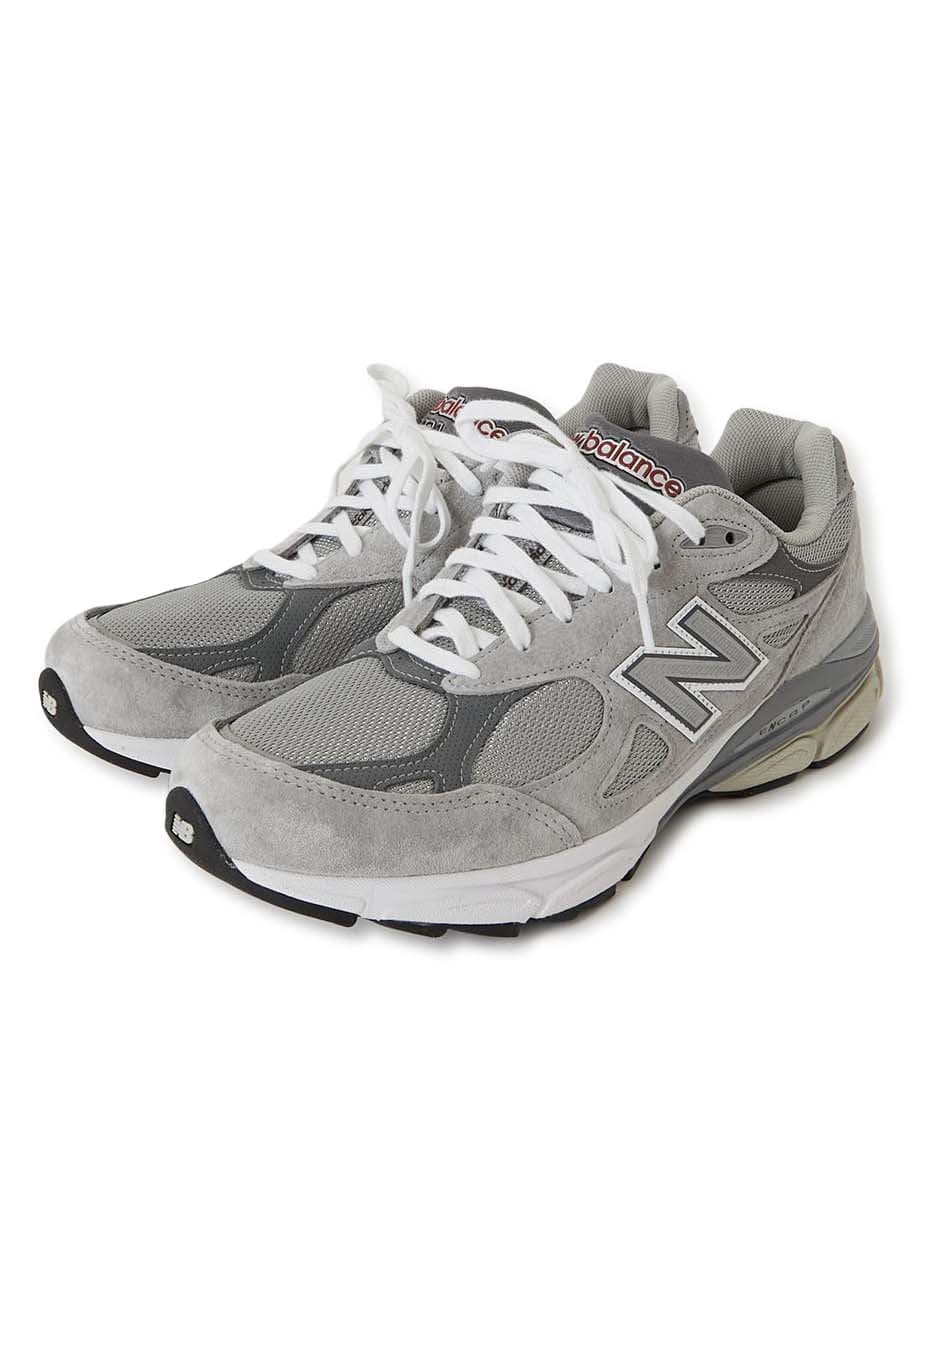 NEW BALANCE M990 GY3 MADE IN USA